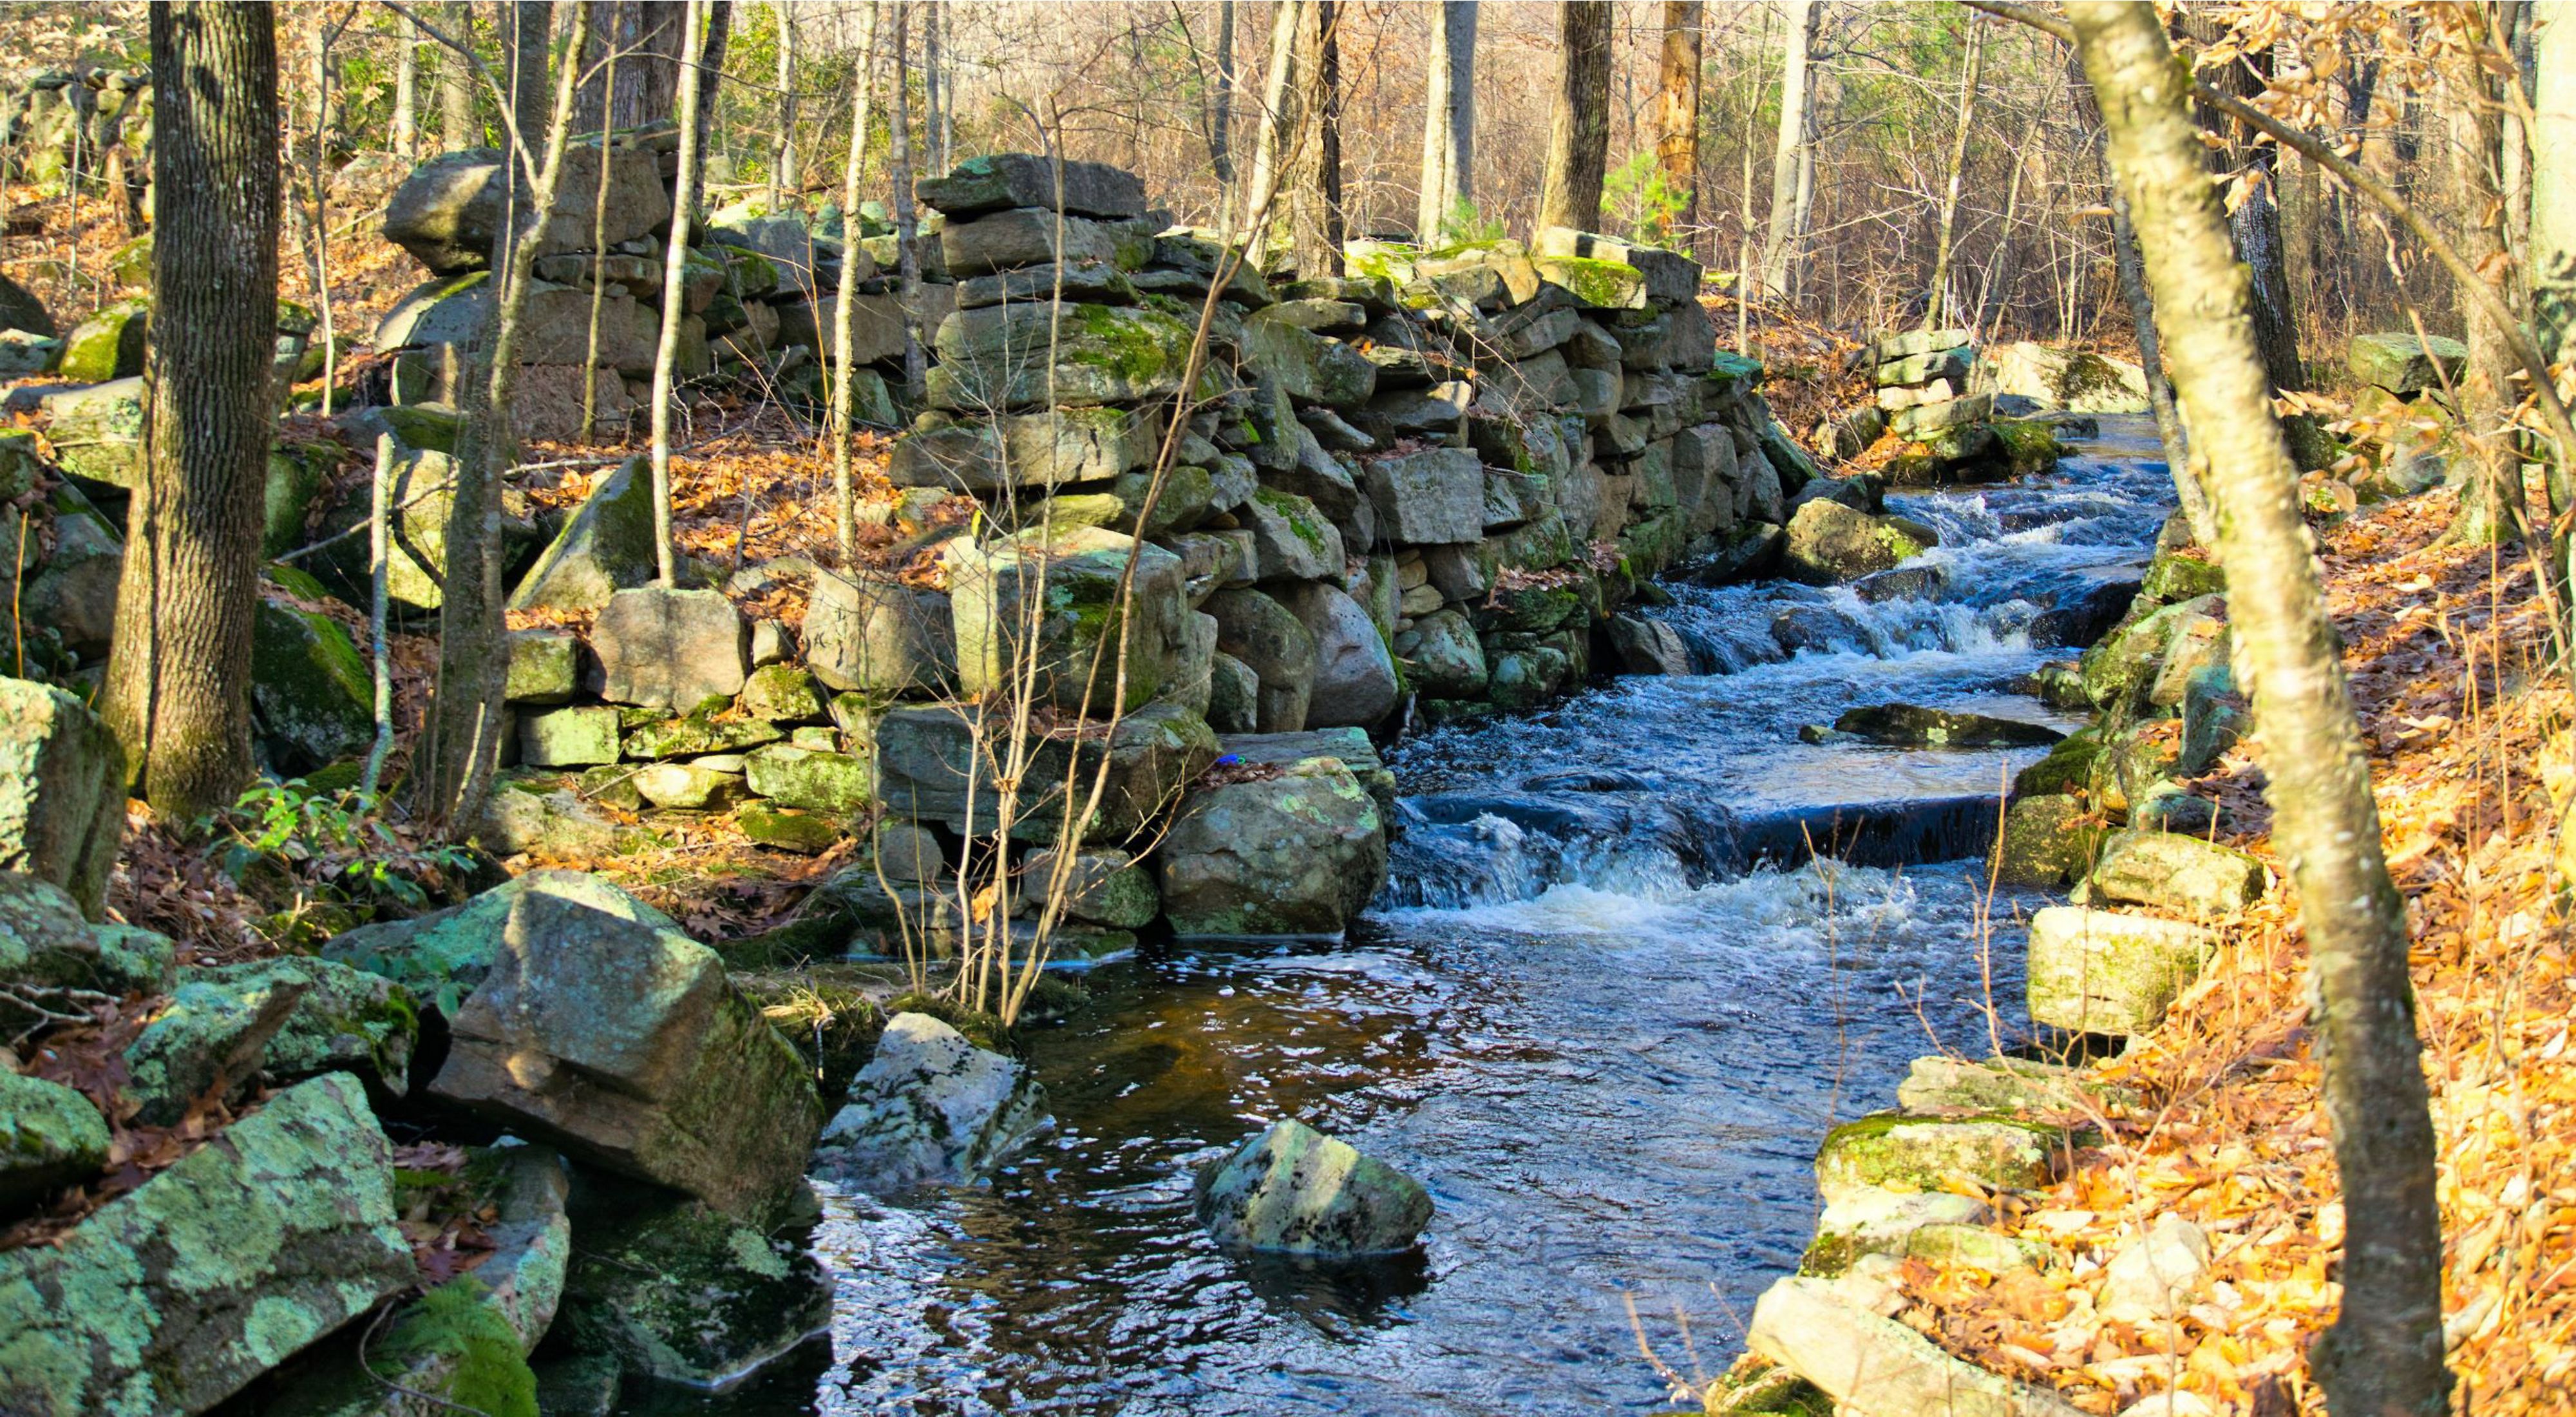 A small stream flows through the stone ruins of an old mill surrounded by forest.